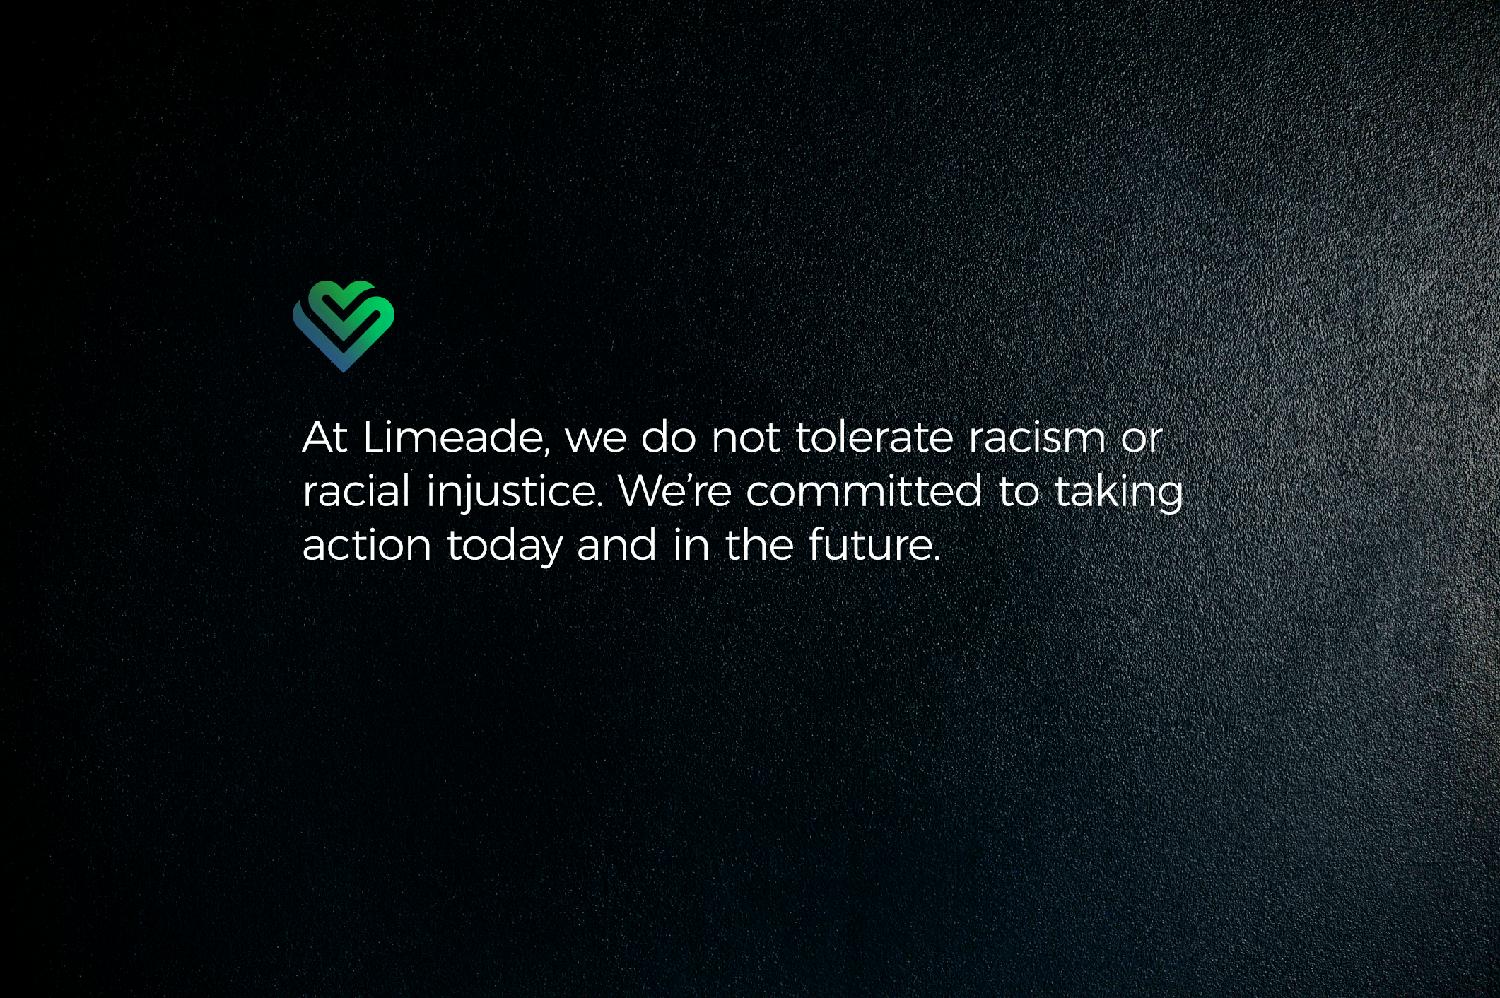 At Limeade, we do not tolerate racism or racial injustice. We're committed to taking action today and in the future